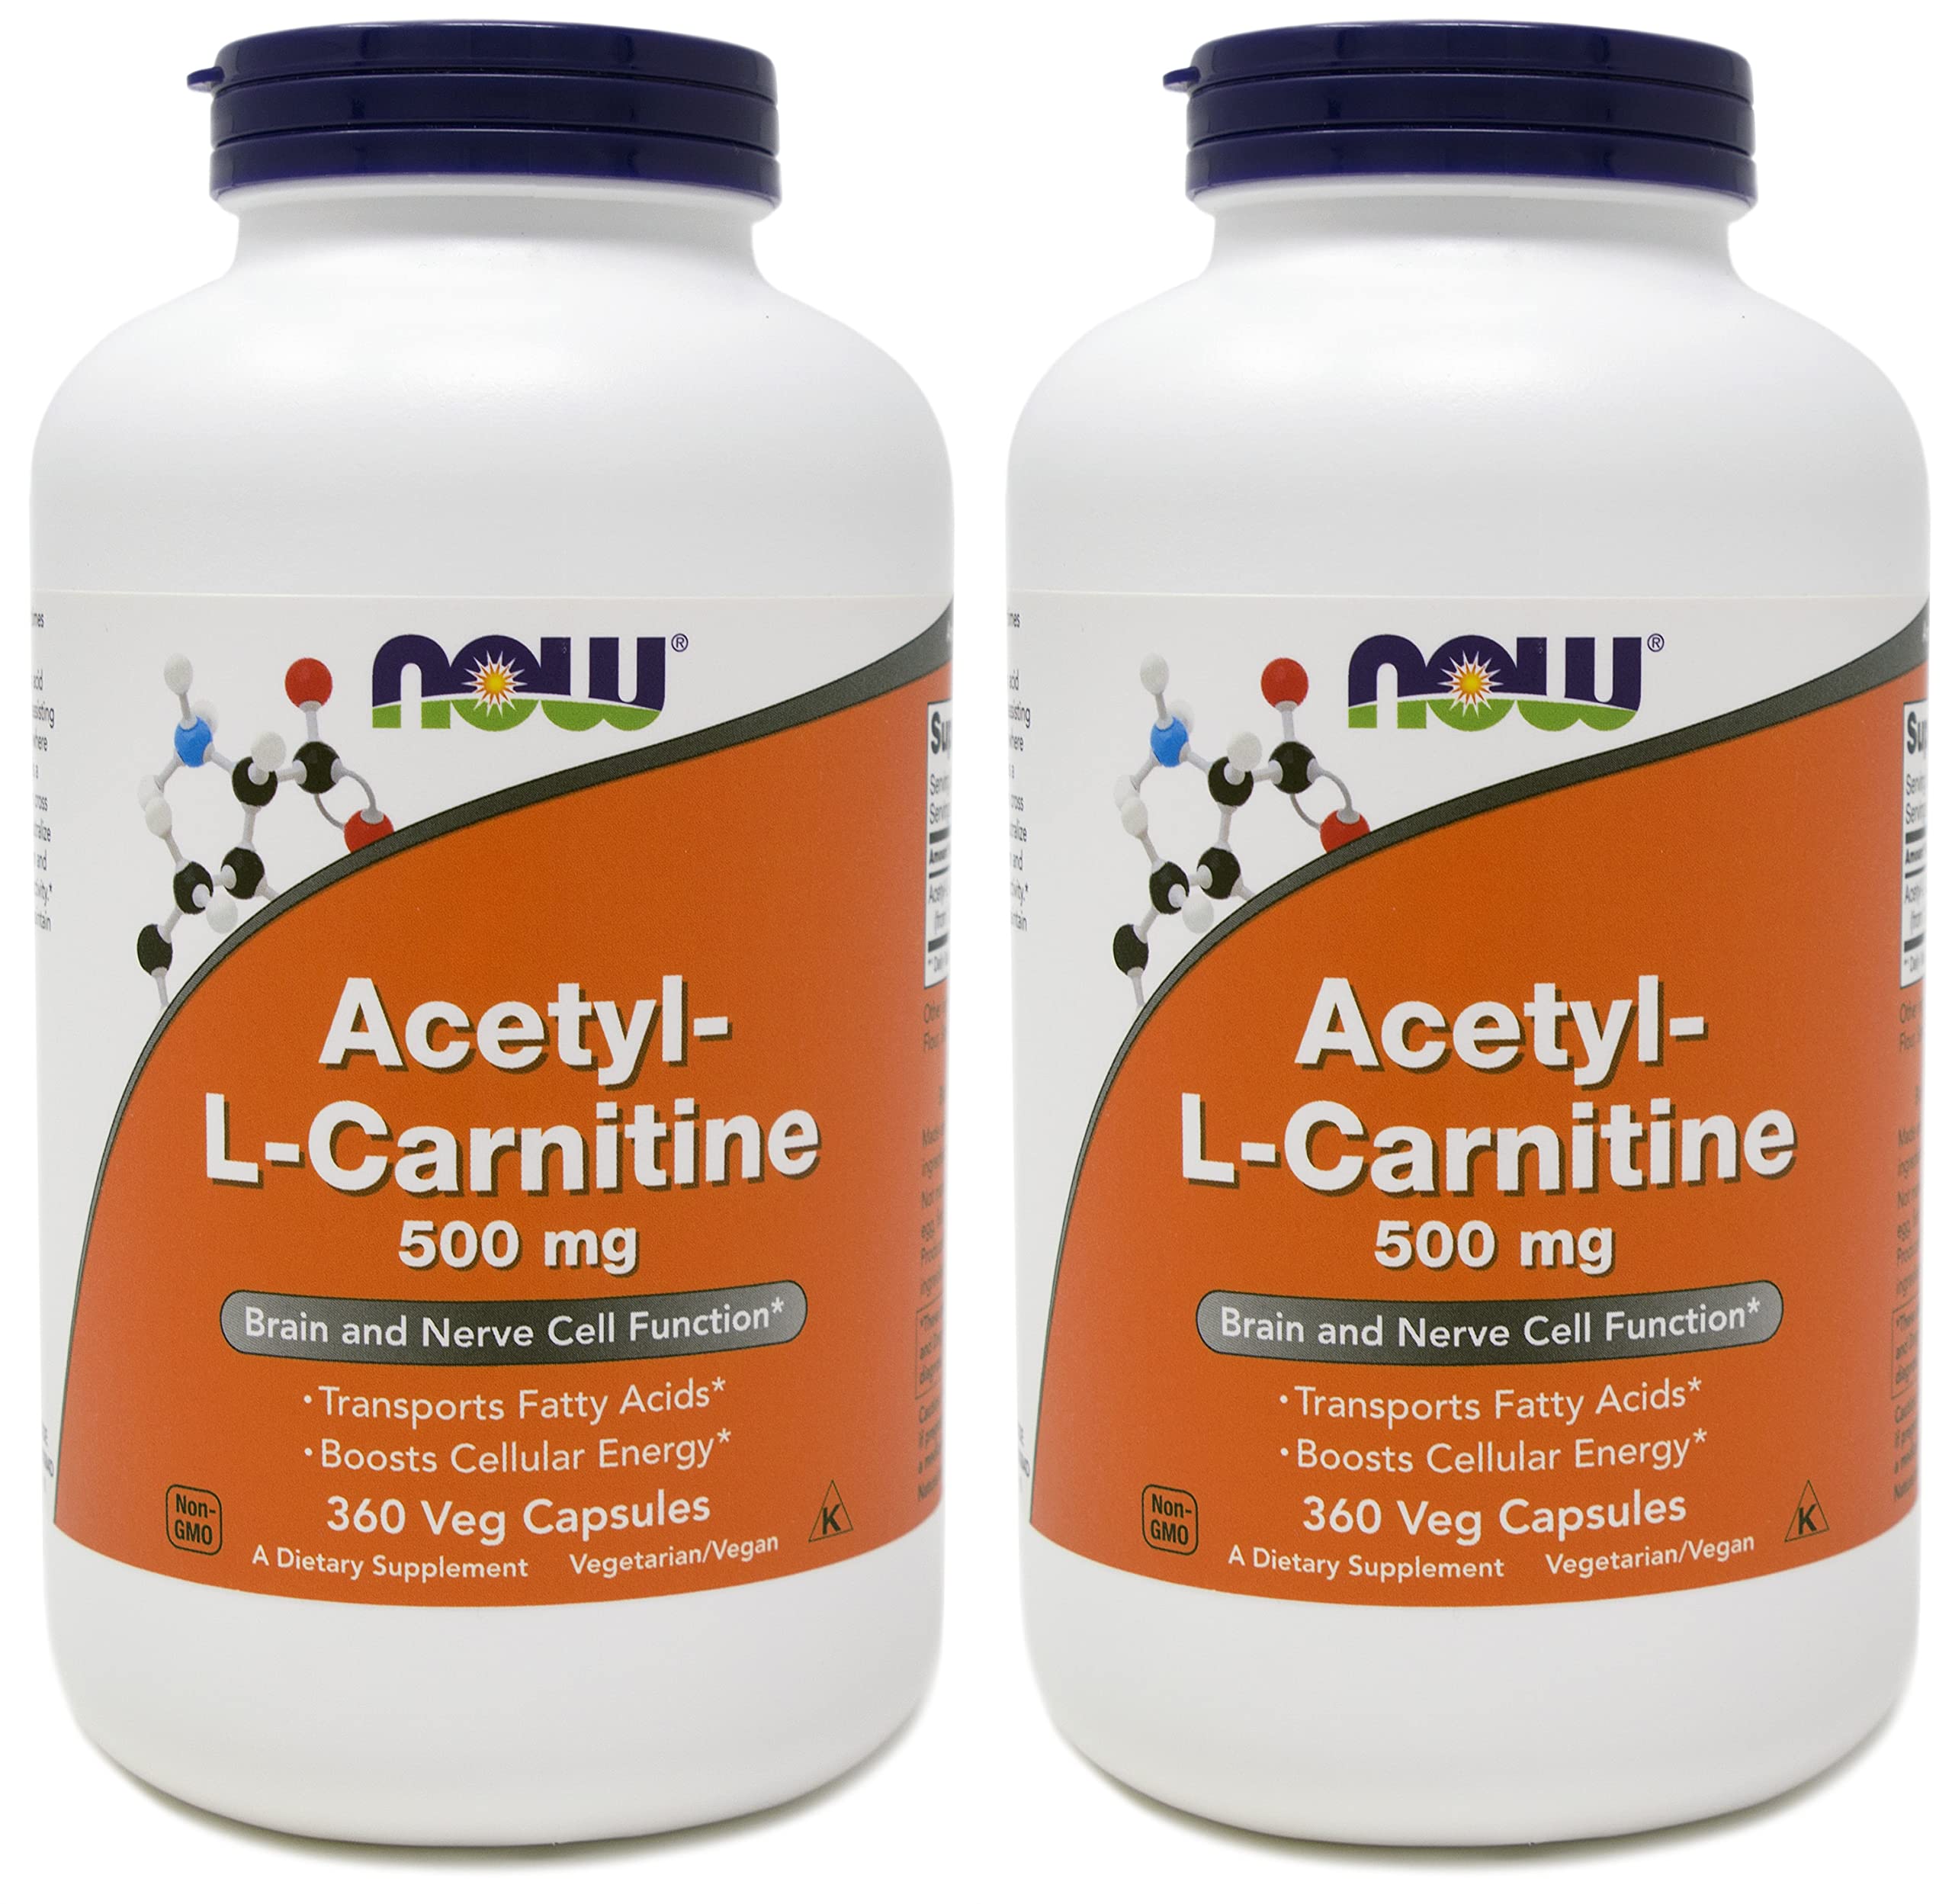 Now Foods Acetyl-L-Carnitine ACL 500 mg, 360 Veg Capsules (Pack of 2) - Non-GMO